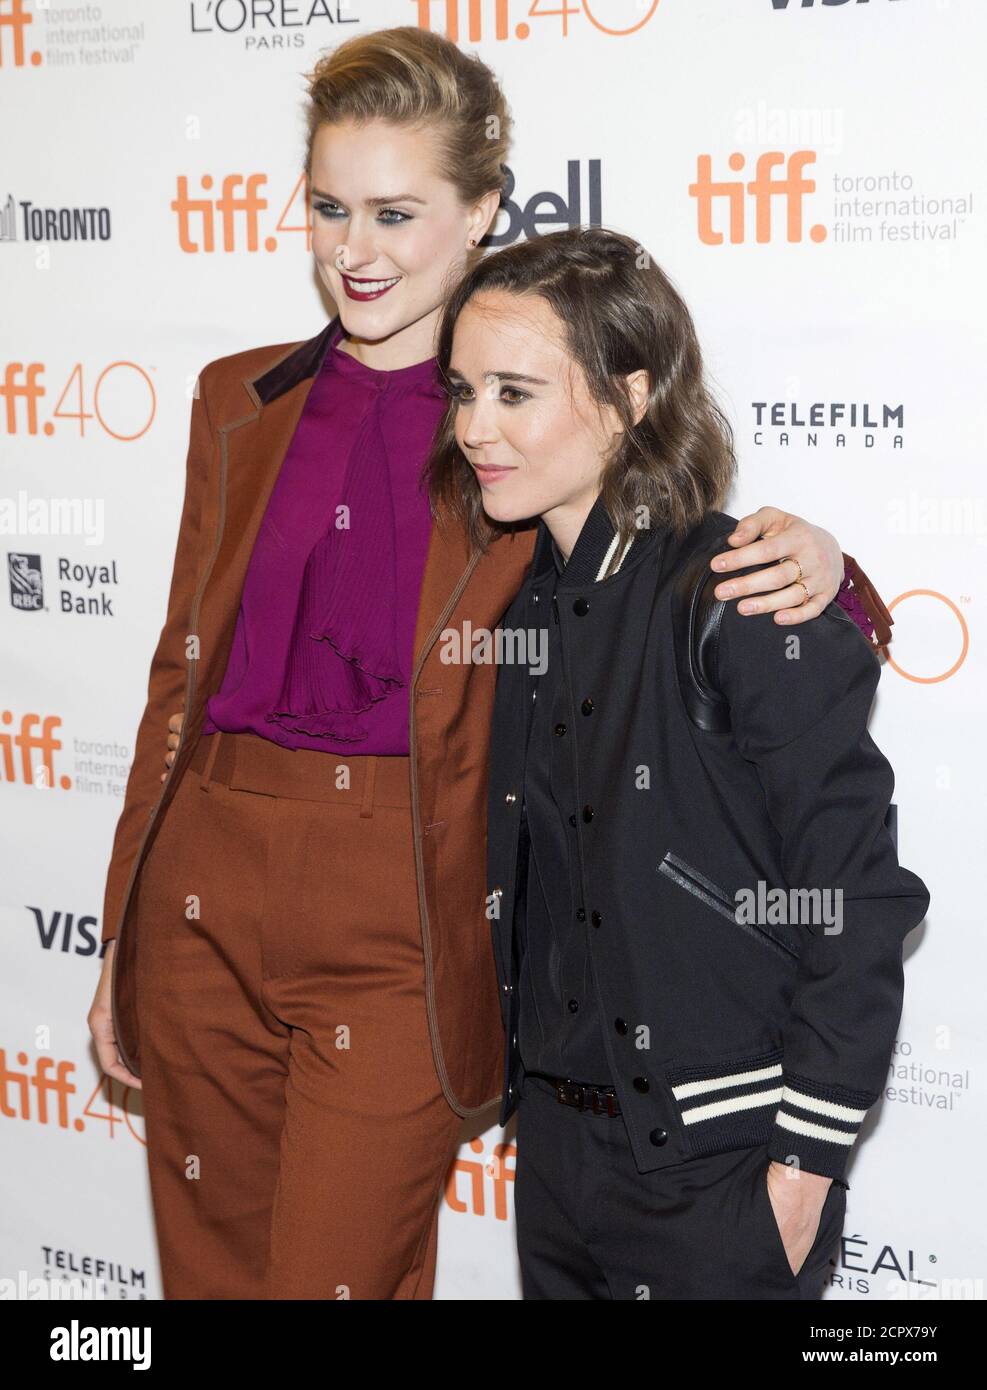 Ellen Page arrives with Evan Rachel Wood (L) on the red carpet for the film 'Into the Forest' during the 40th Toronto International Film Festival in Toronto, Canada, September 12, 2015. TIFF runs from September 10-20.   REUTERS/Mark Blinch Stock Photo